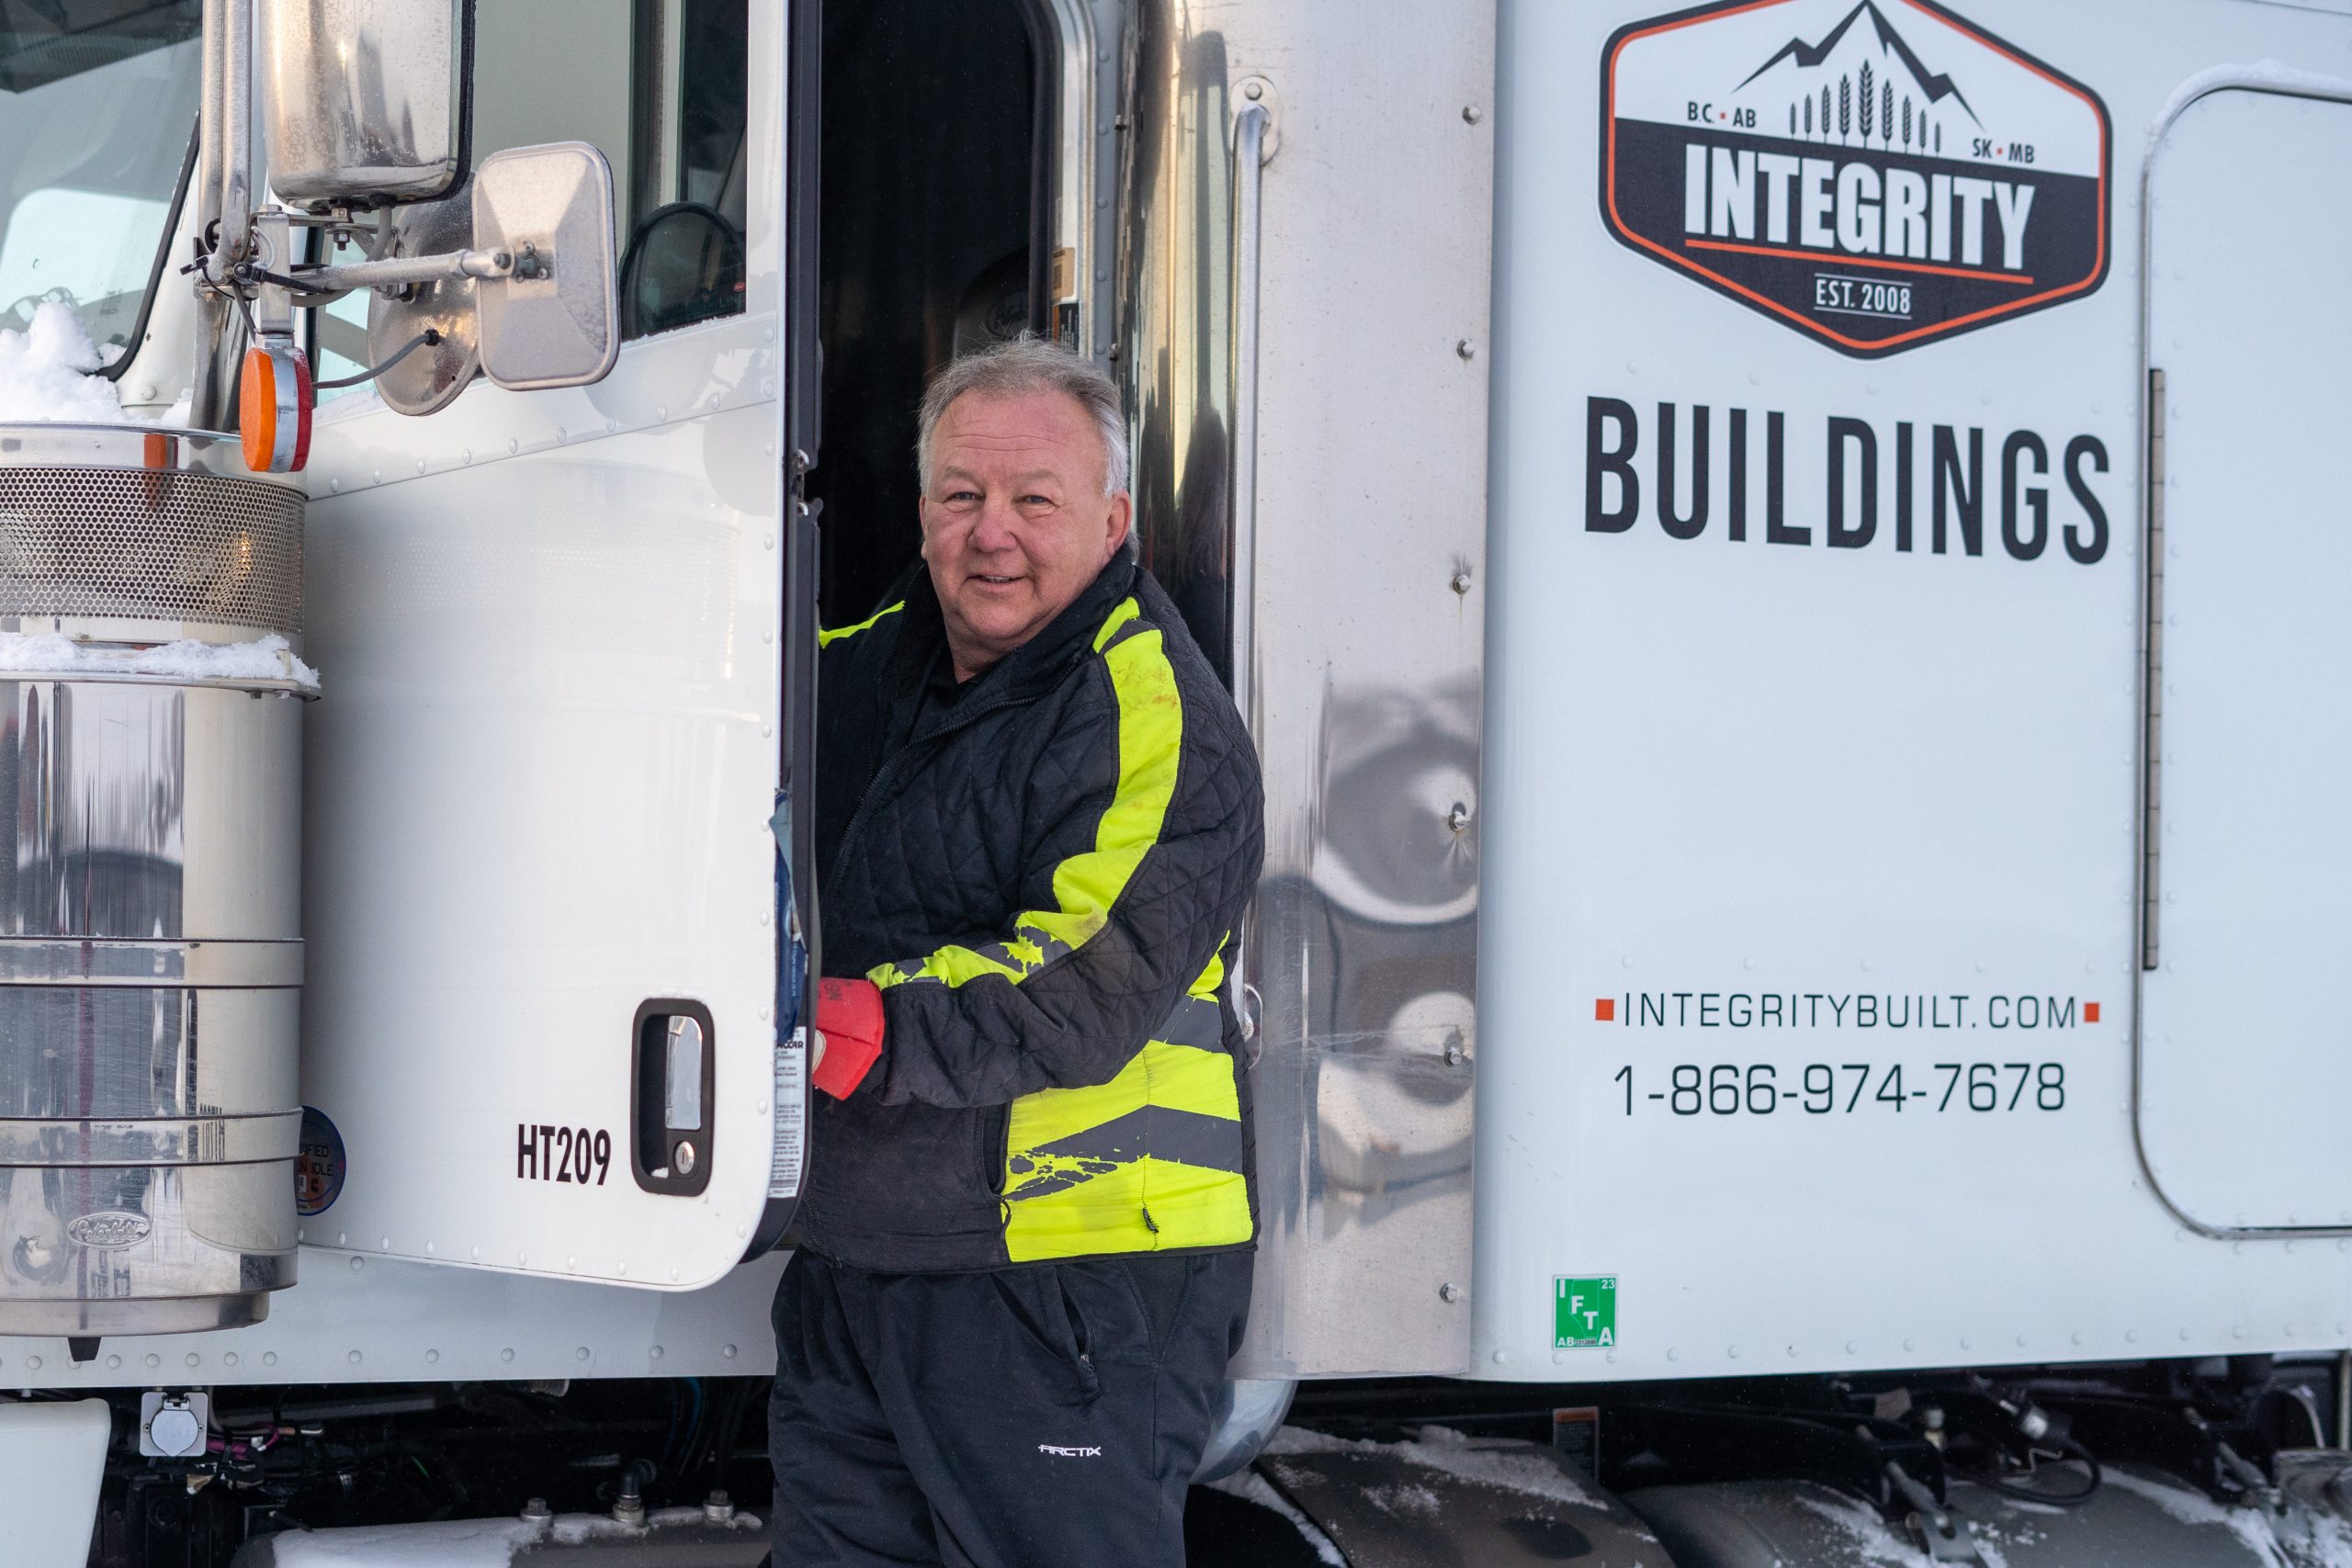 Robin Miller standing by Integrity truck